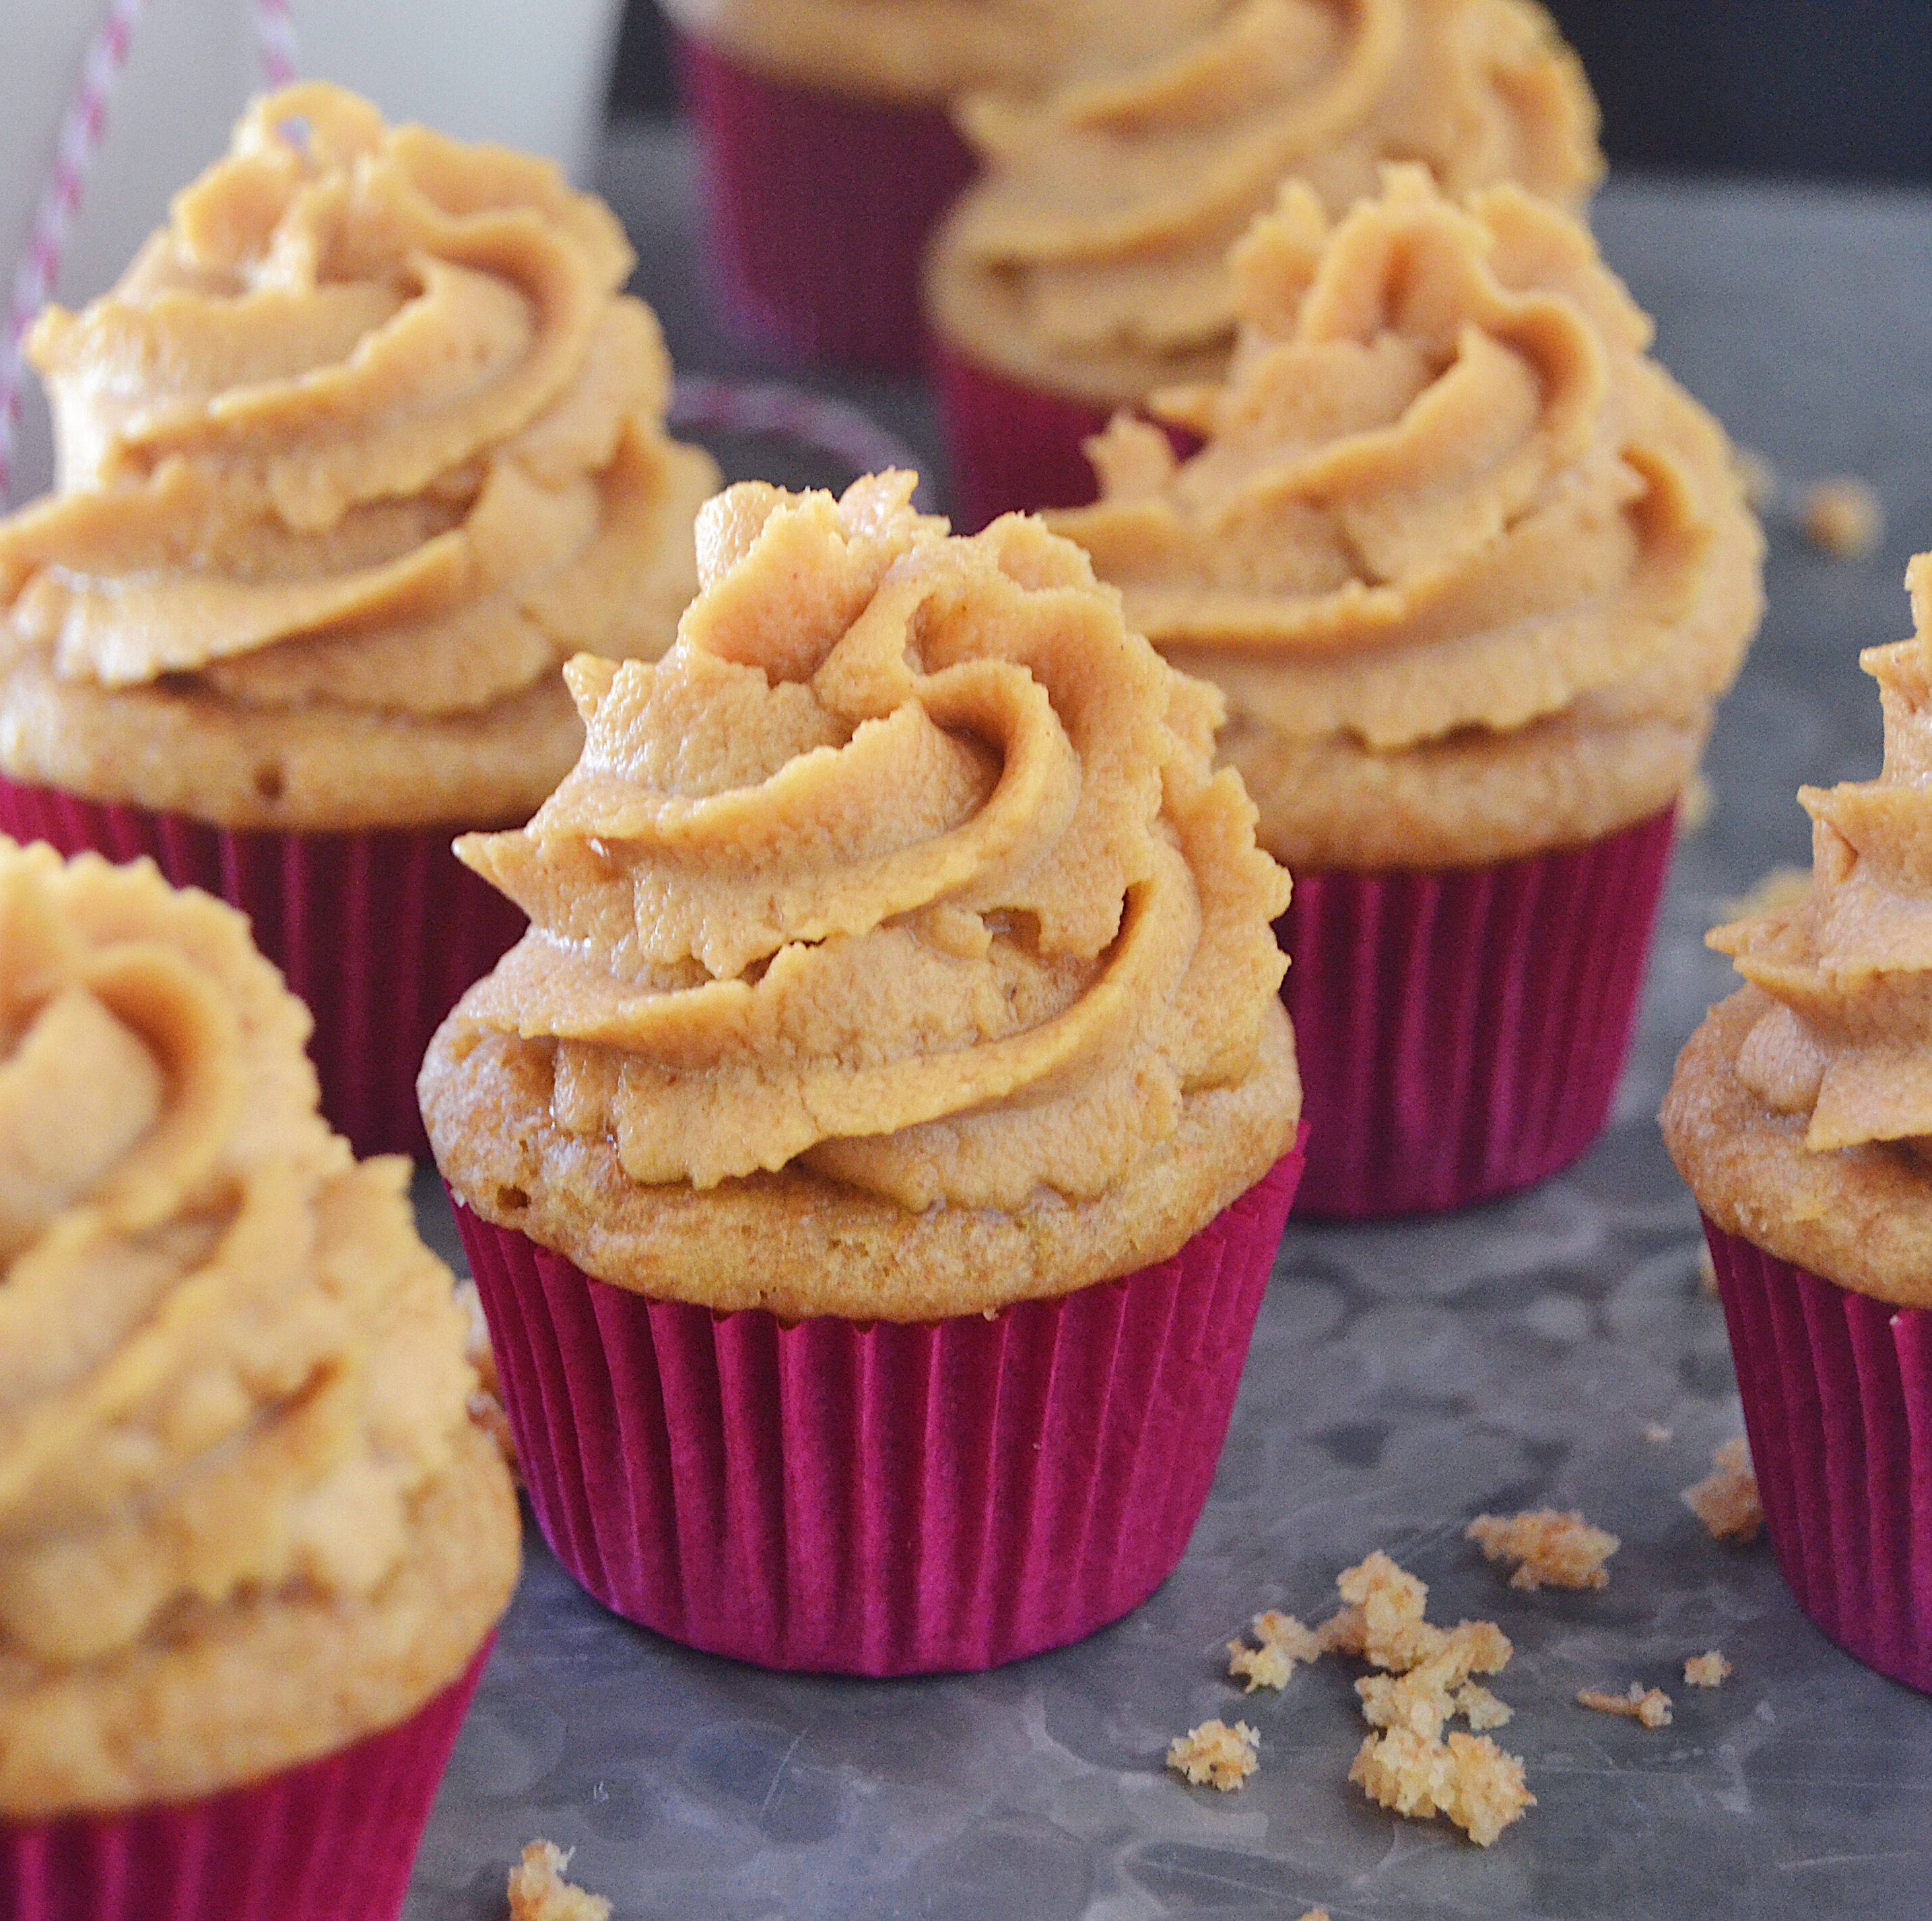 Sugar's Sweet Cake Pupcakes With Peanut Butter Frosting dog treat recipe